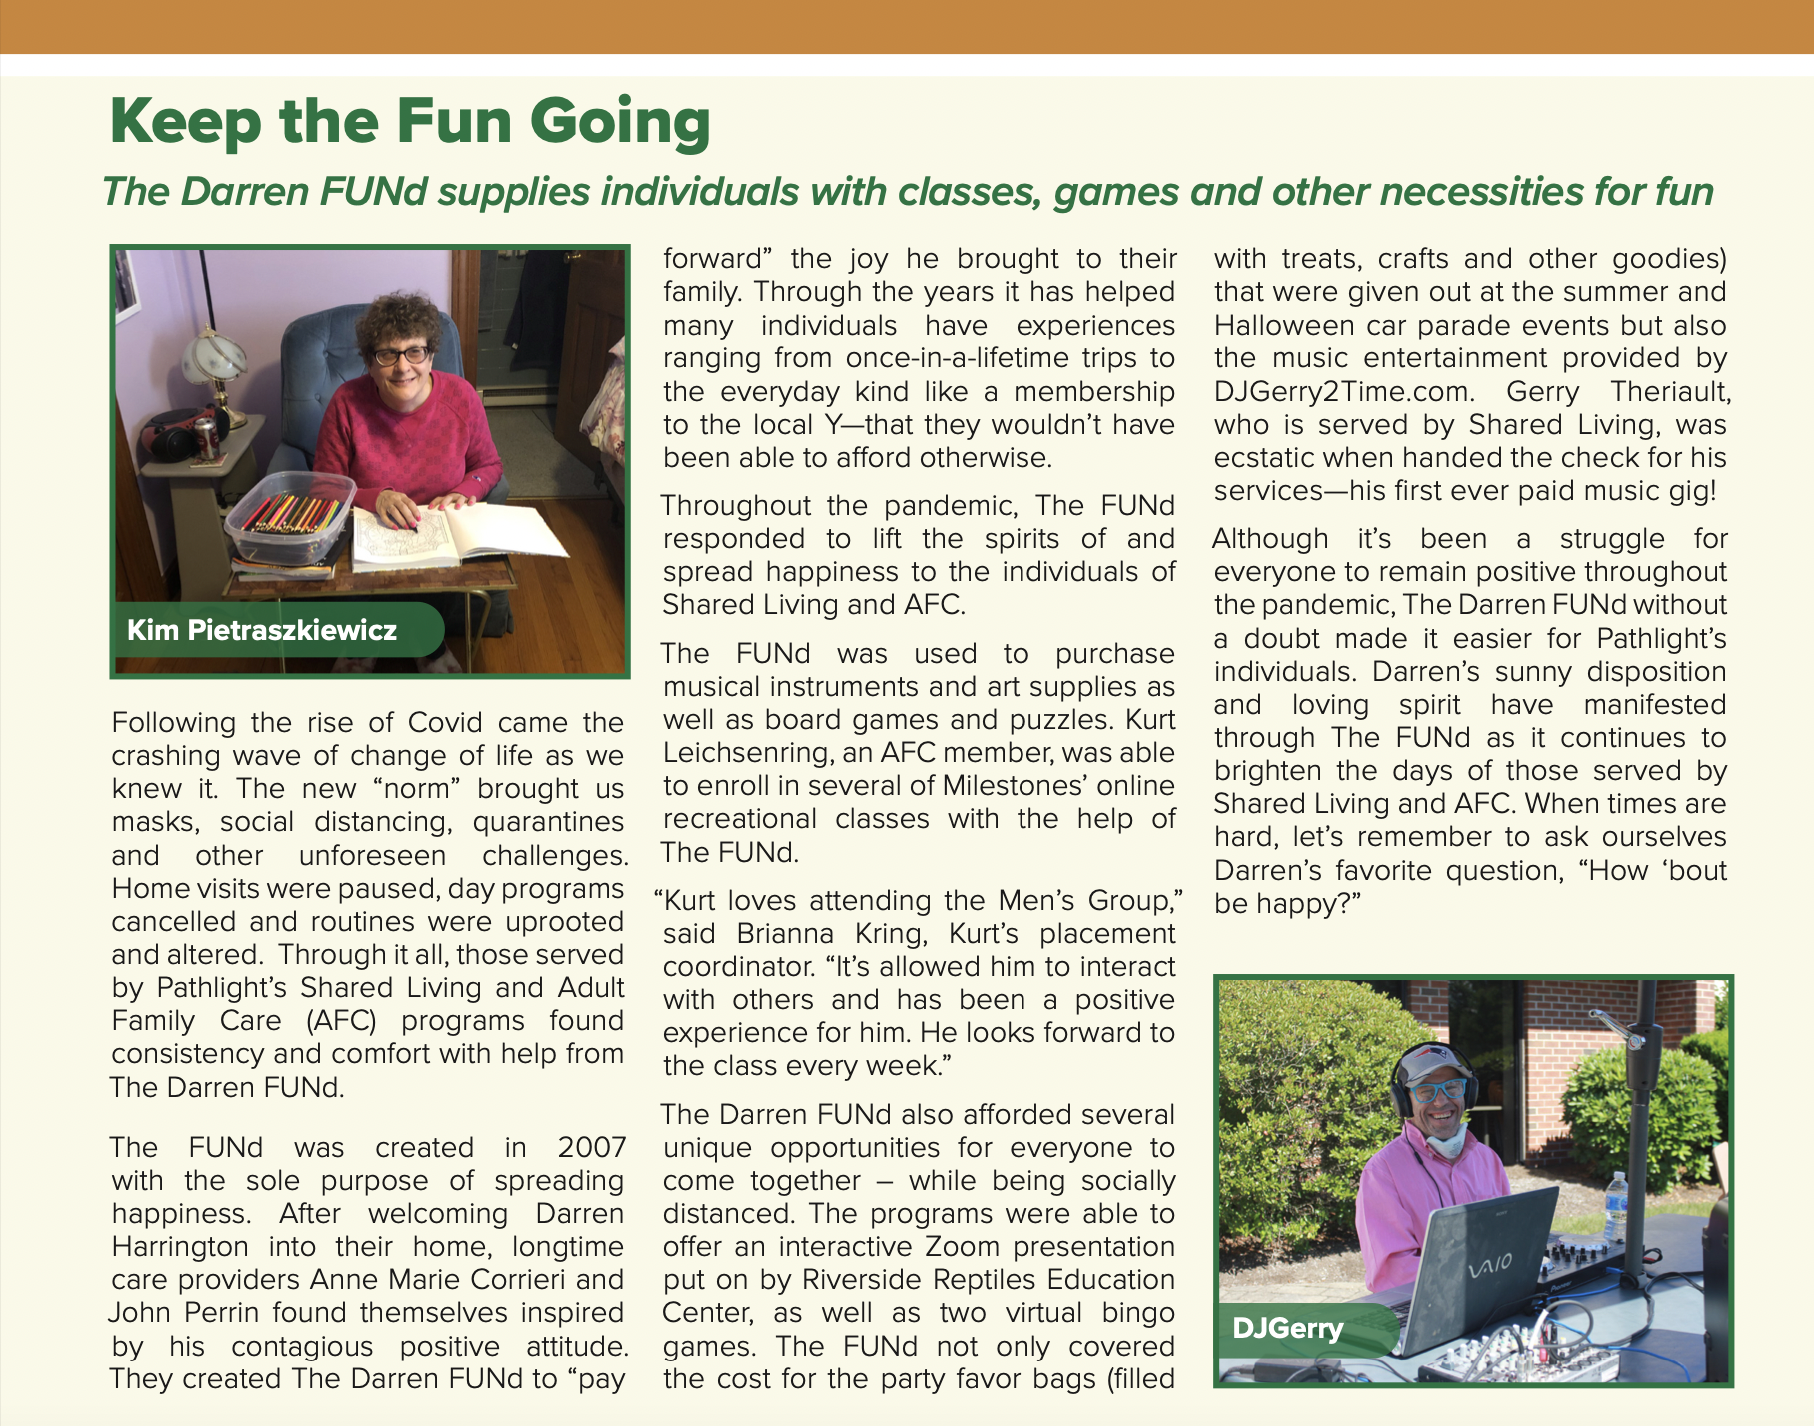 Keep the Fun Going article about the Darren FUNd